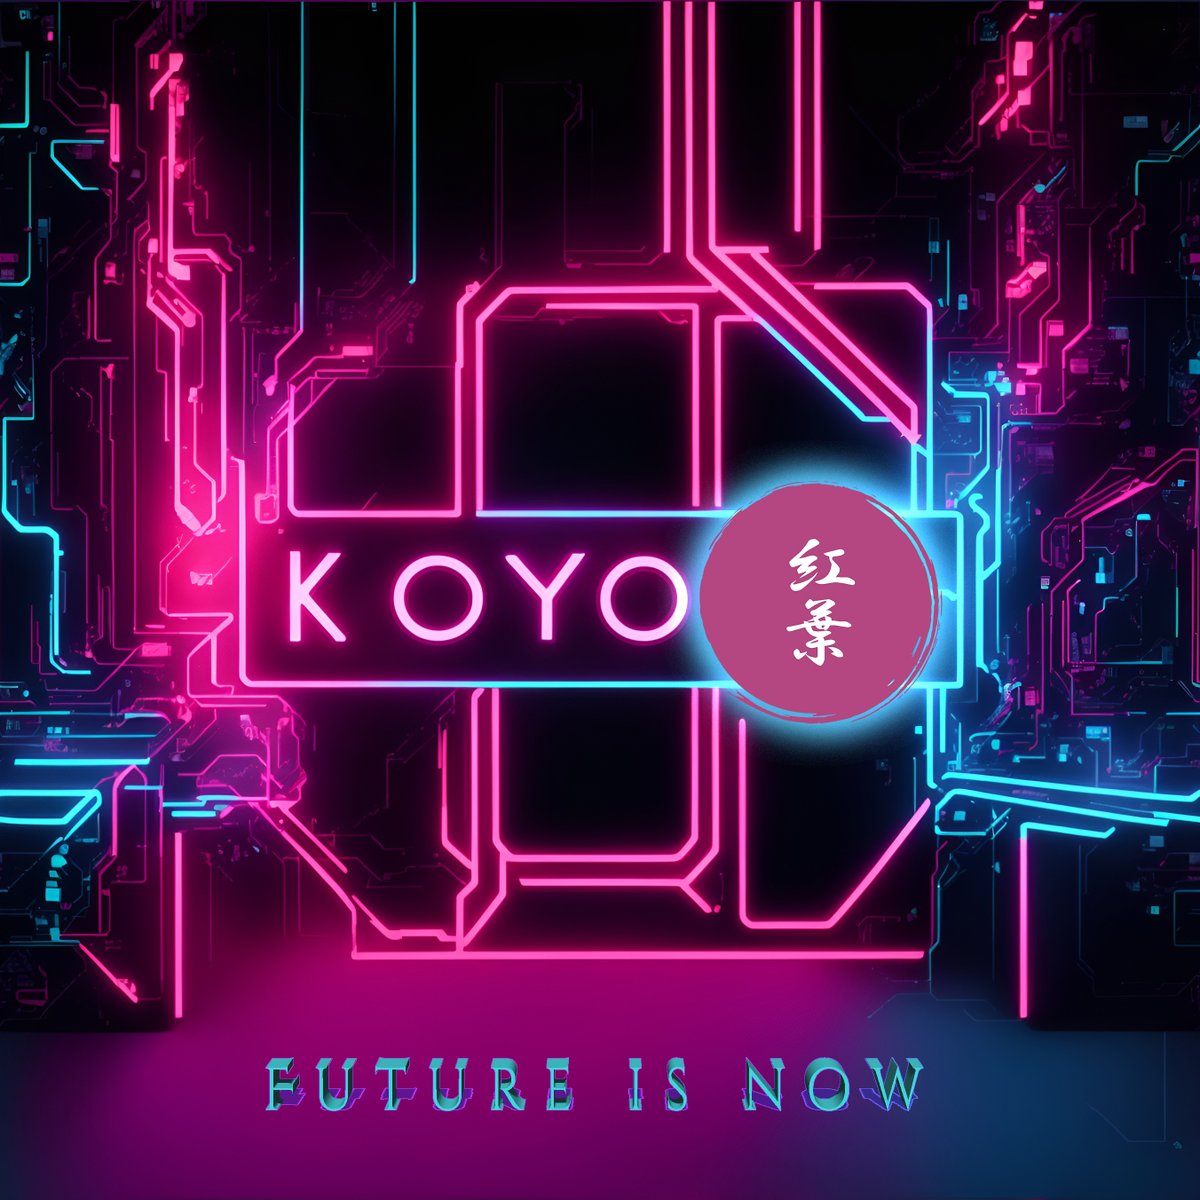 $koy will build the financial platform of the future at #shibarium. We will be there side by side with $shib and the rest of the projects helping with loyalty.
#ShibaArmy  #koyarmy